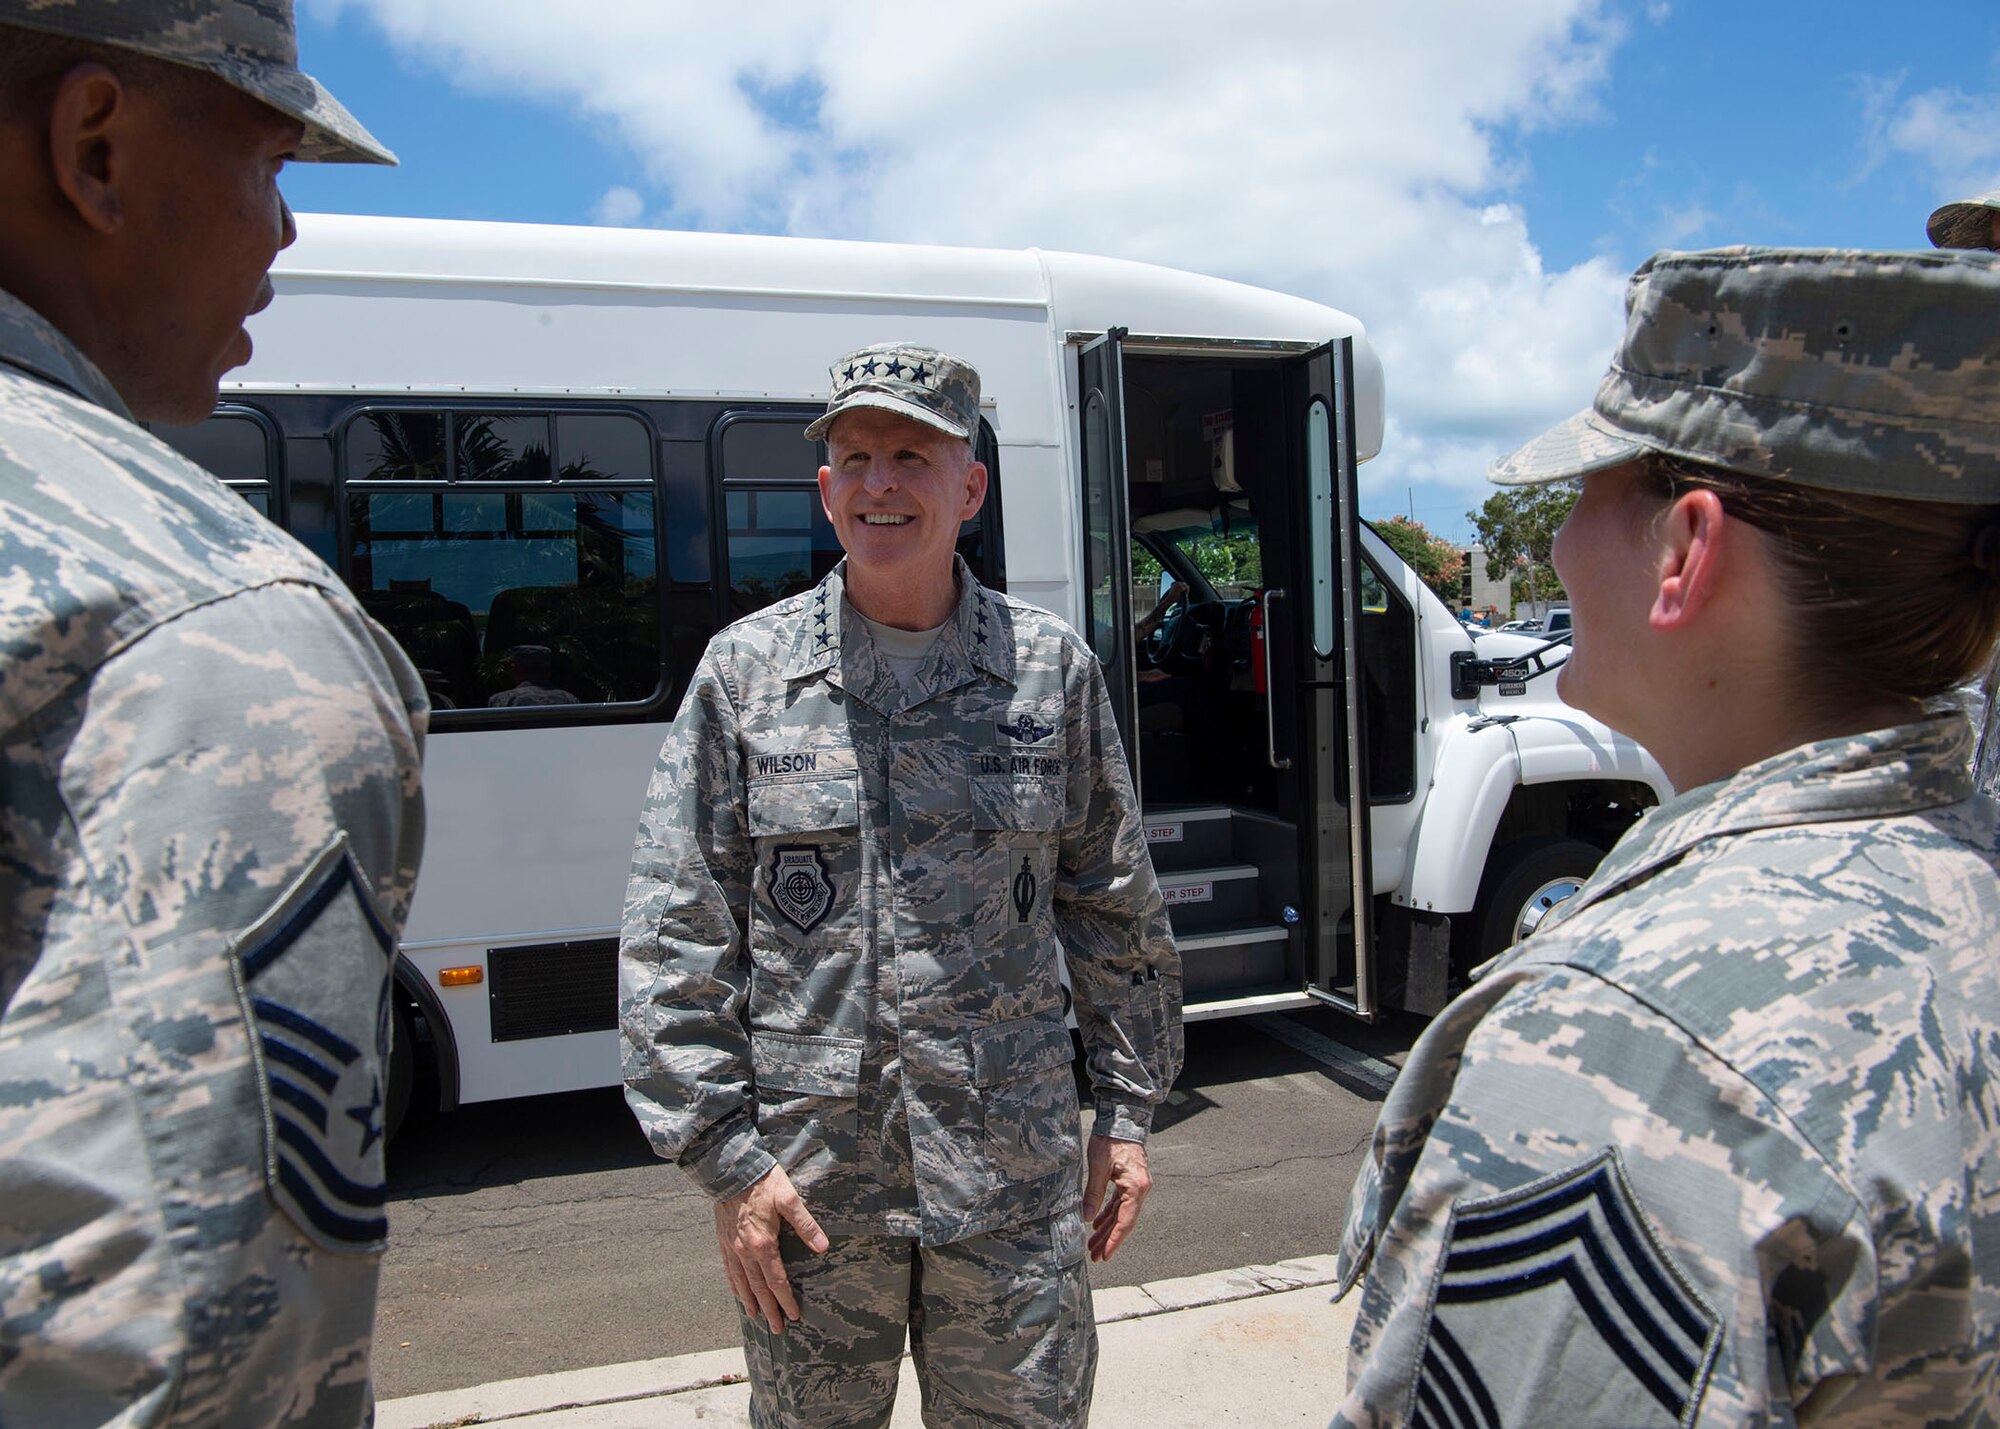 Master Sgt. Sheldon Grant, 647th Force Support Squadron food service section chief, and Chief Master Sgt. Katherine Kwarcinski, 647th FSS superintendent, greet Air Force Vice Chief of Staff Gen. Stephen W. Wilson at the Hale Aina Dining Facility, Joint Base Pearl Harbor-Hickam, Hawaii, July 26, 2018.  Wilson visited Airmen from around the 15th Wing after the Pacific Air Forces change of command ceremony. During his visit, Wilson had lunch with some of the chiefs, first sergeants and presidents of base private organizations to discuss challenges they have been faced with and reiterate the importance of modernization, readiness, innovation and revitalizing squadrons. (U.S. Air Force photo by Tech. Sgt. Heather Redman)